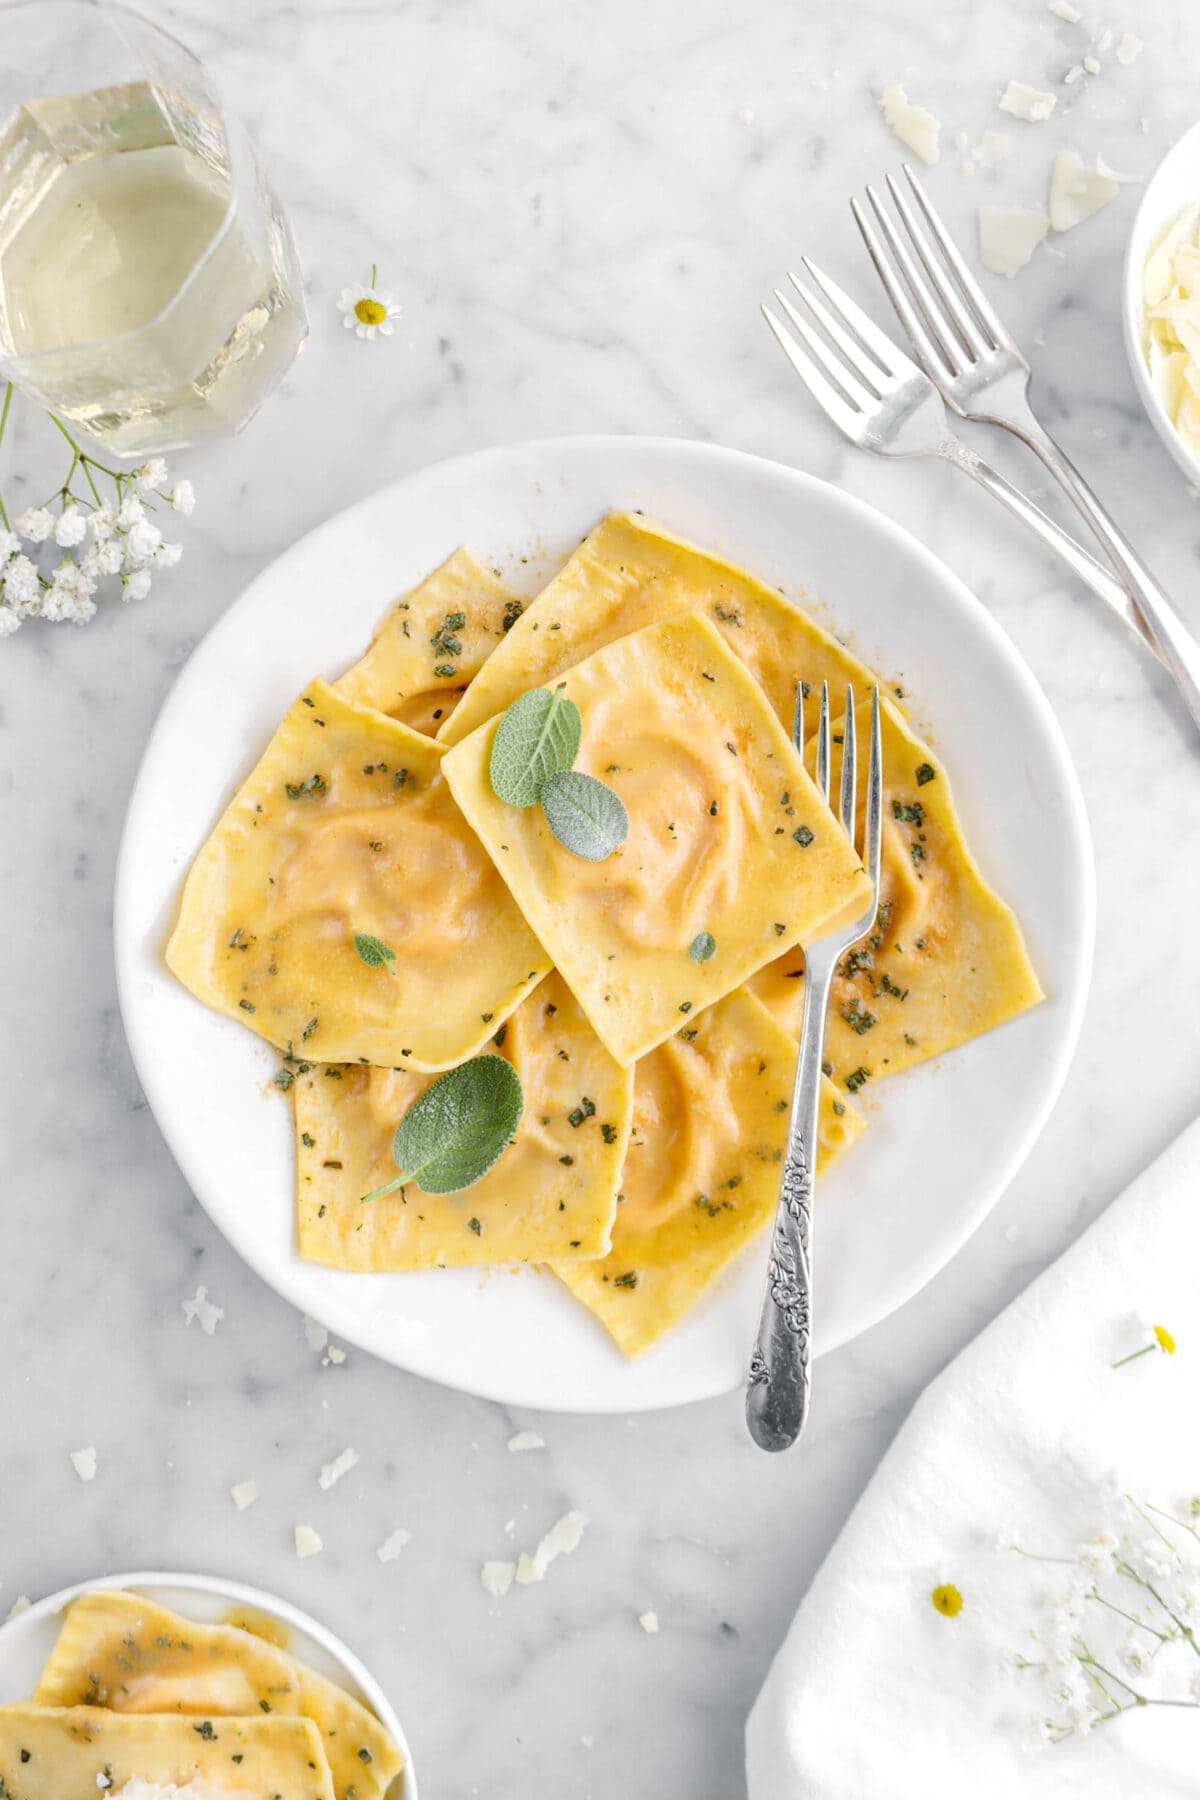 close up of seven on white plate with fork underneath a ravioli, sage leaves on top, with two forks and glass of wine beside.